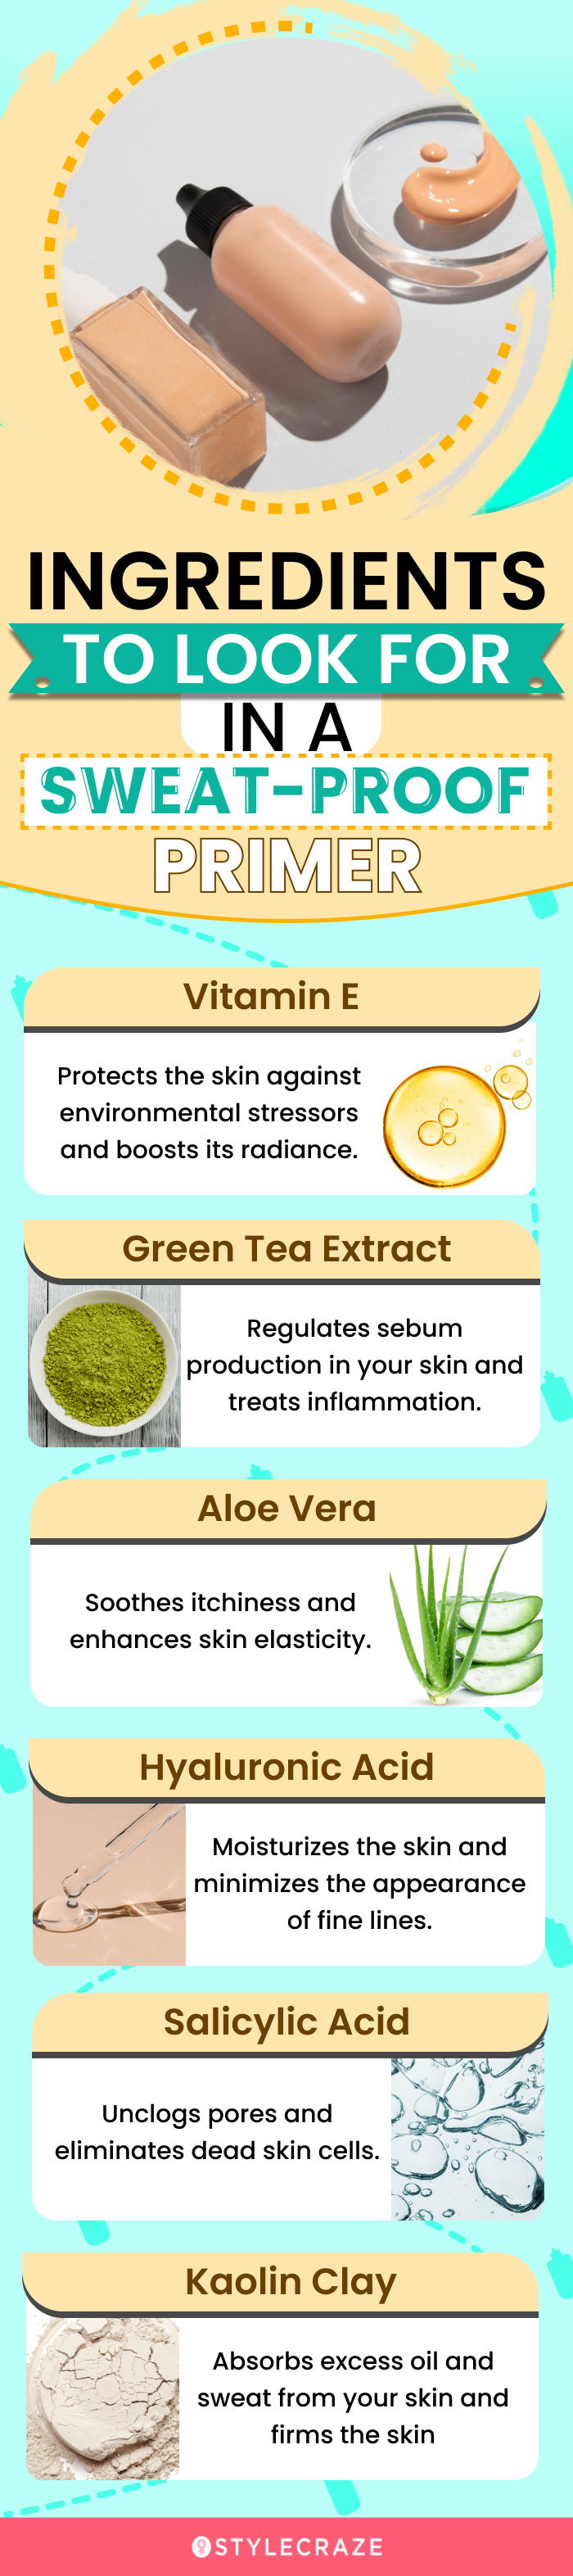 Ingredients To Look For In A Sweat-Proof Primer (infographic)